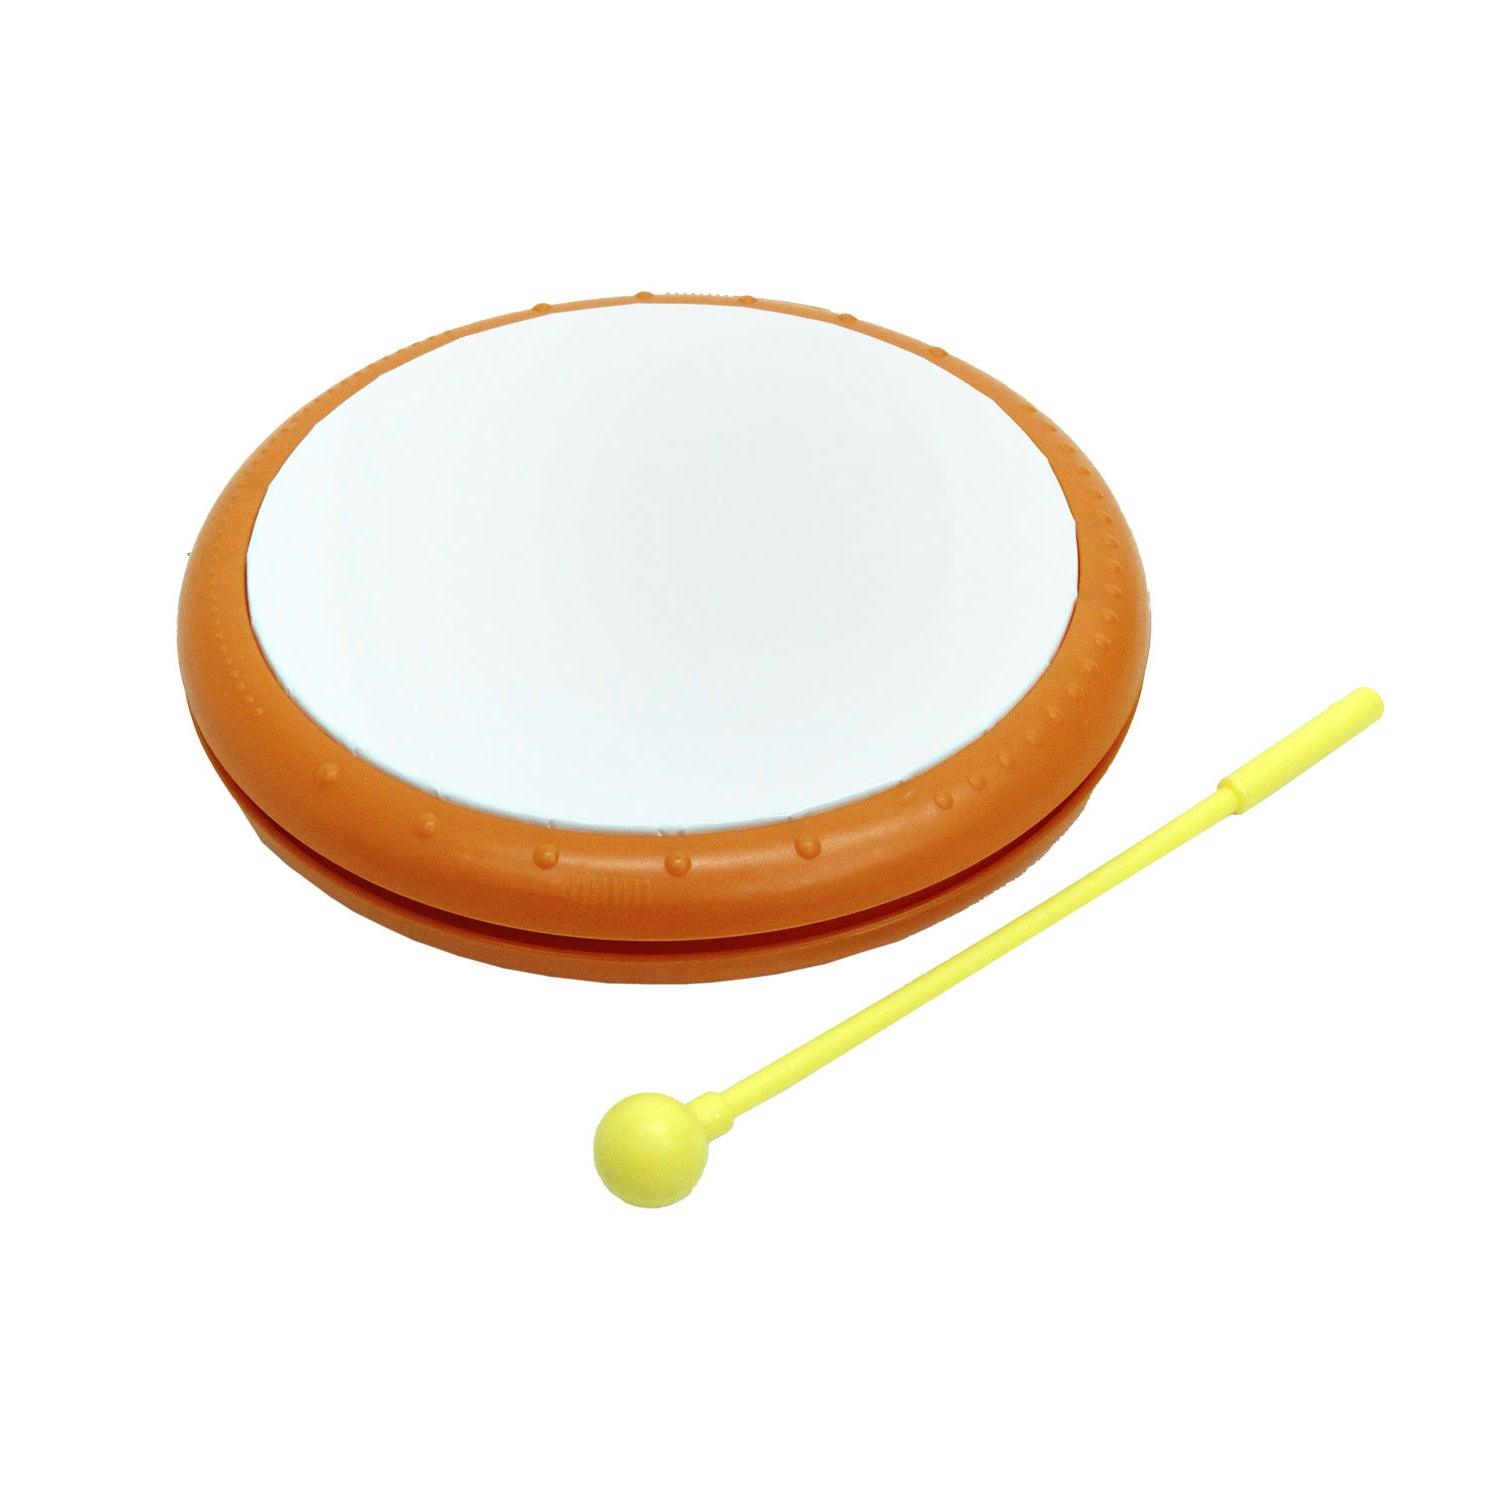 8" Plastic Frame Drum with Mallet - Loomini